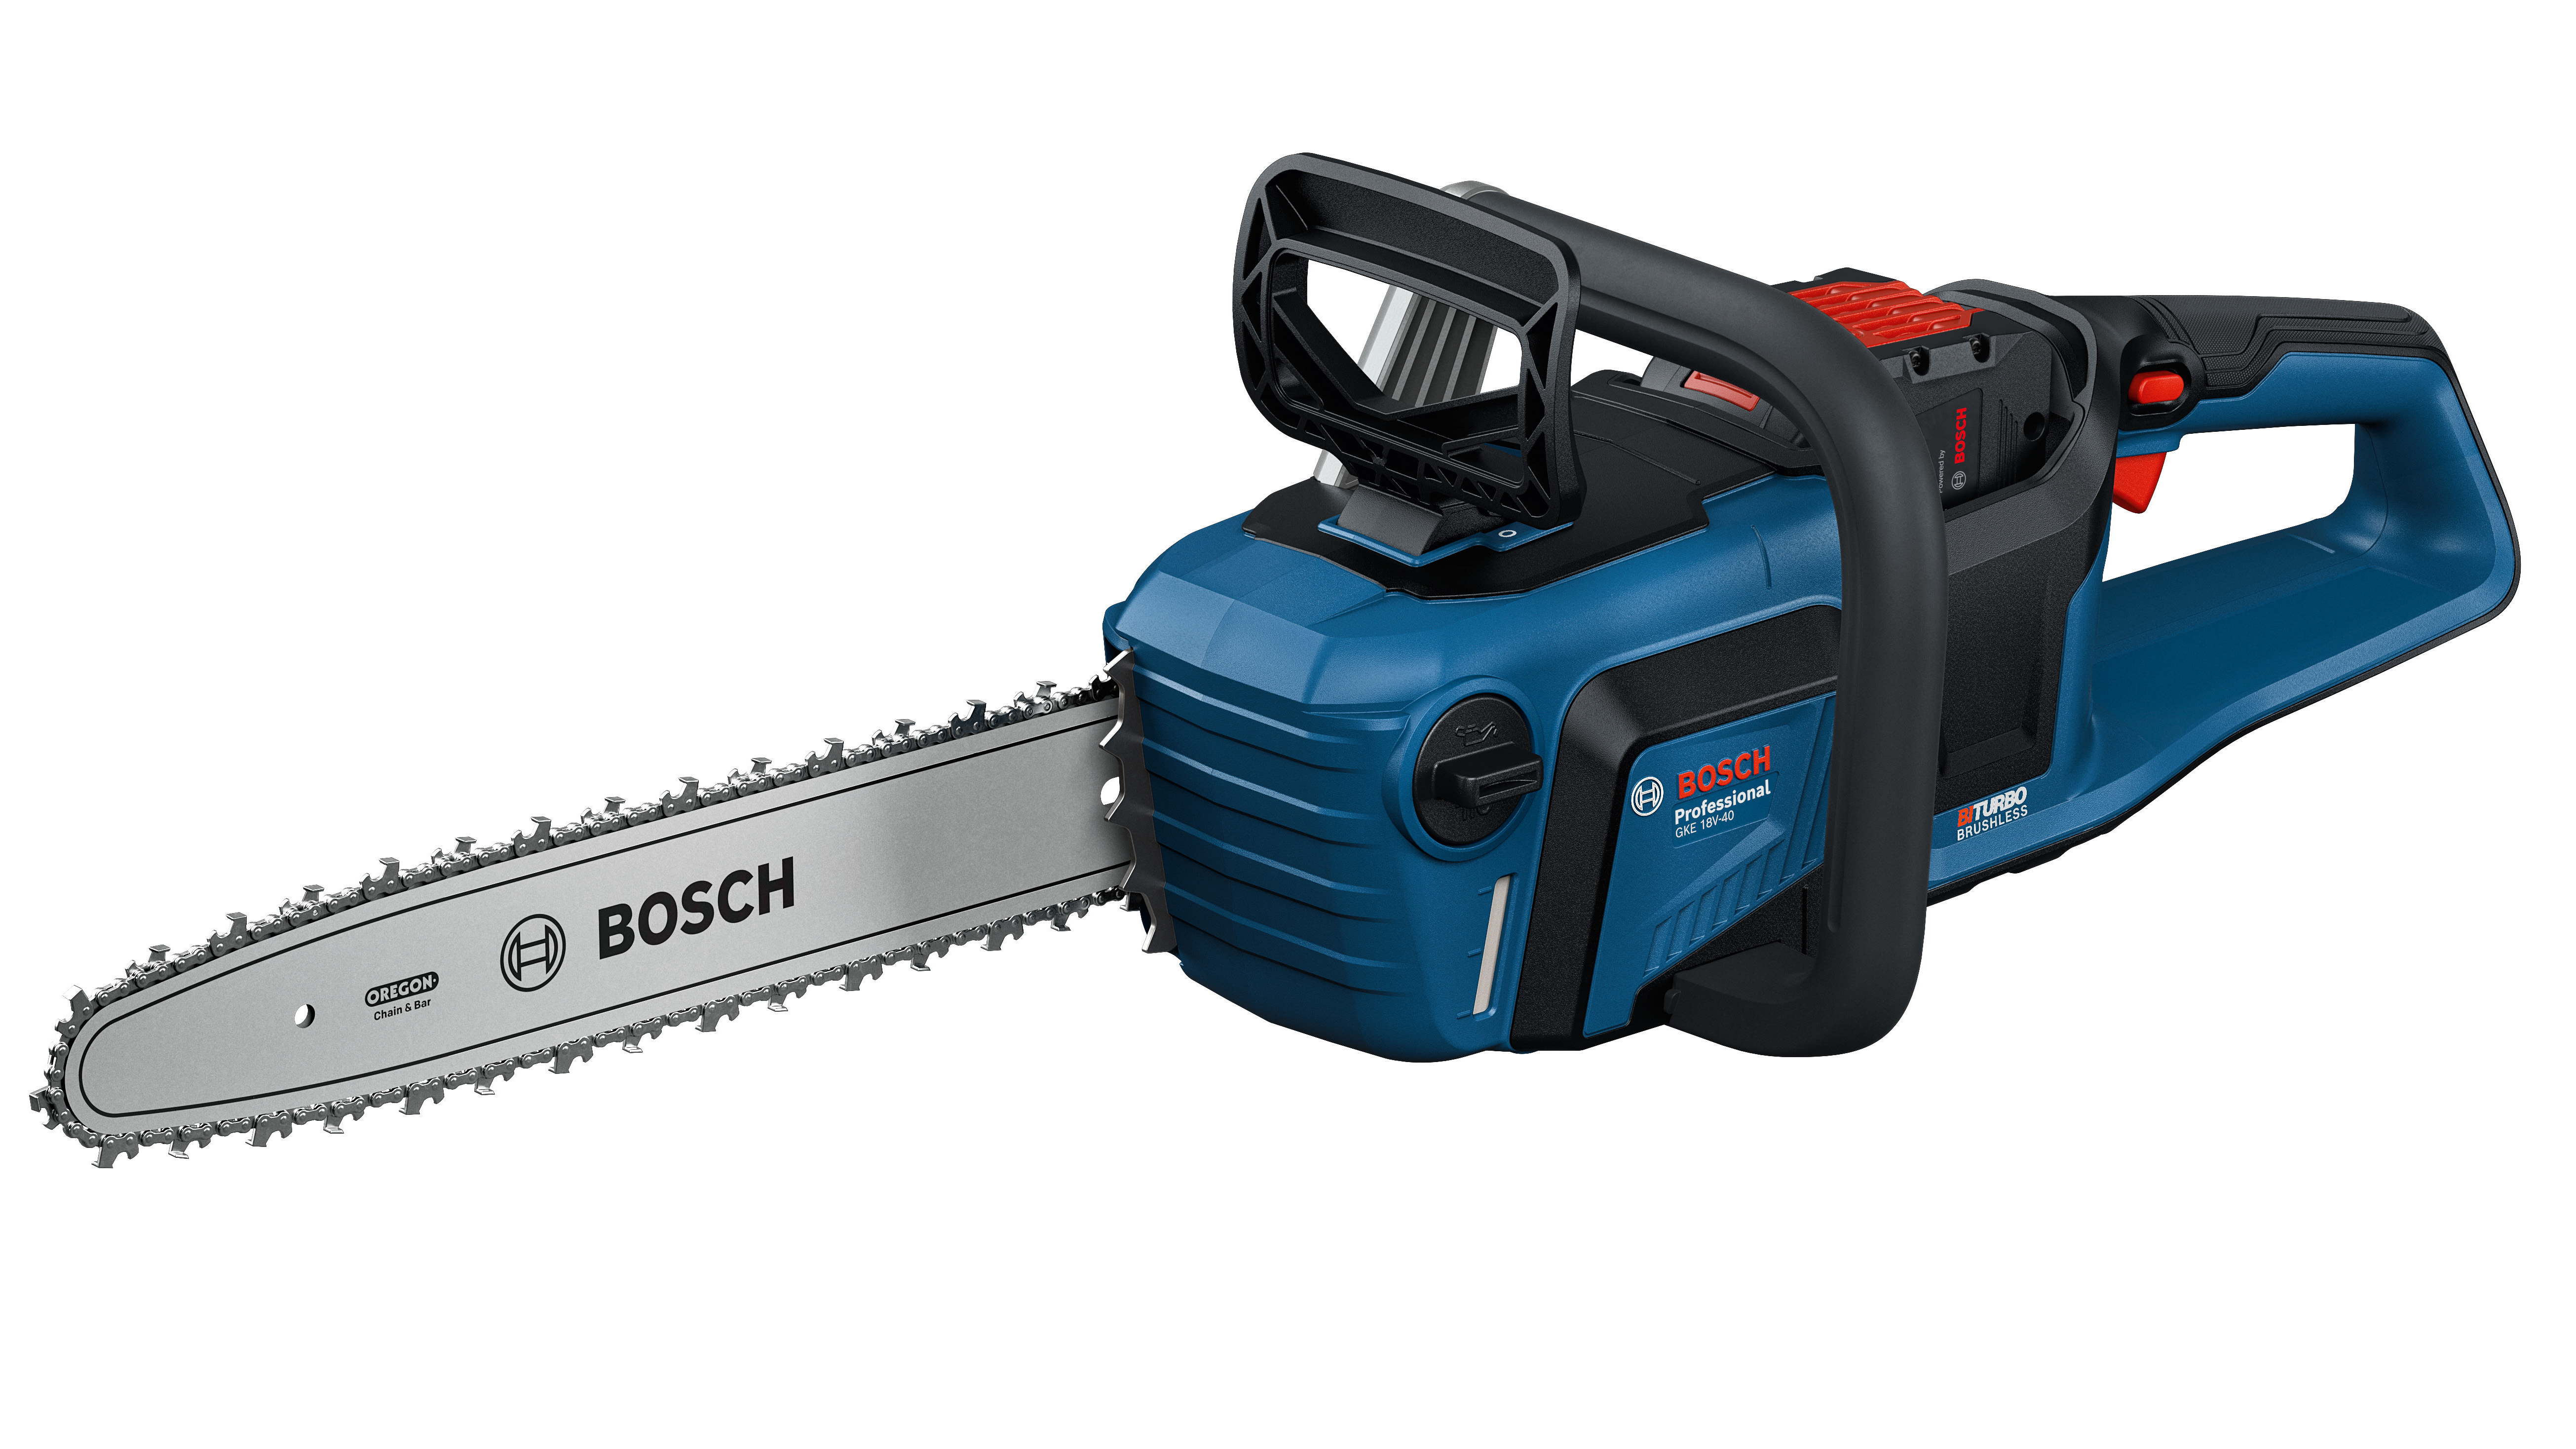 New to the Professional 18V System: Powerful cordless chainsaw from Bosch for professionals